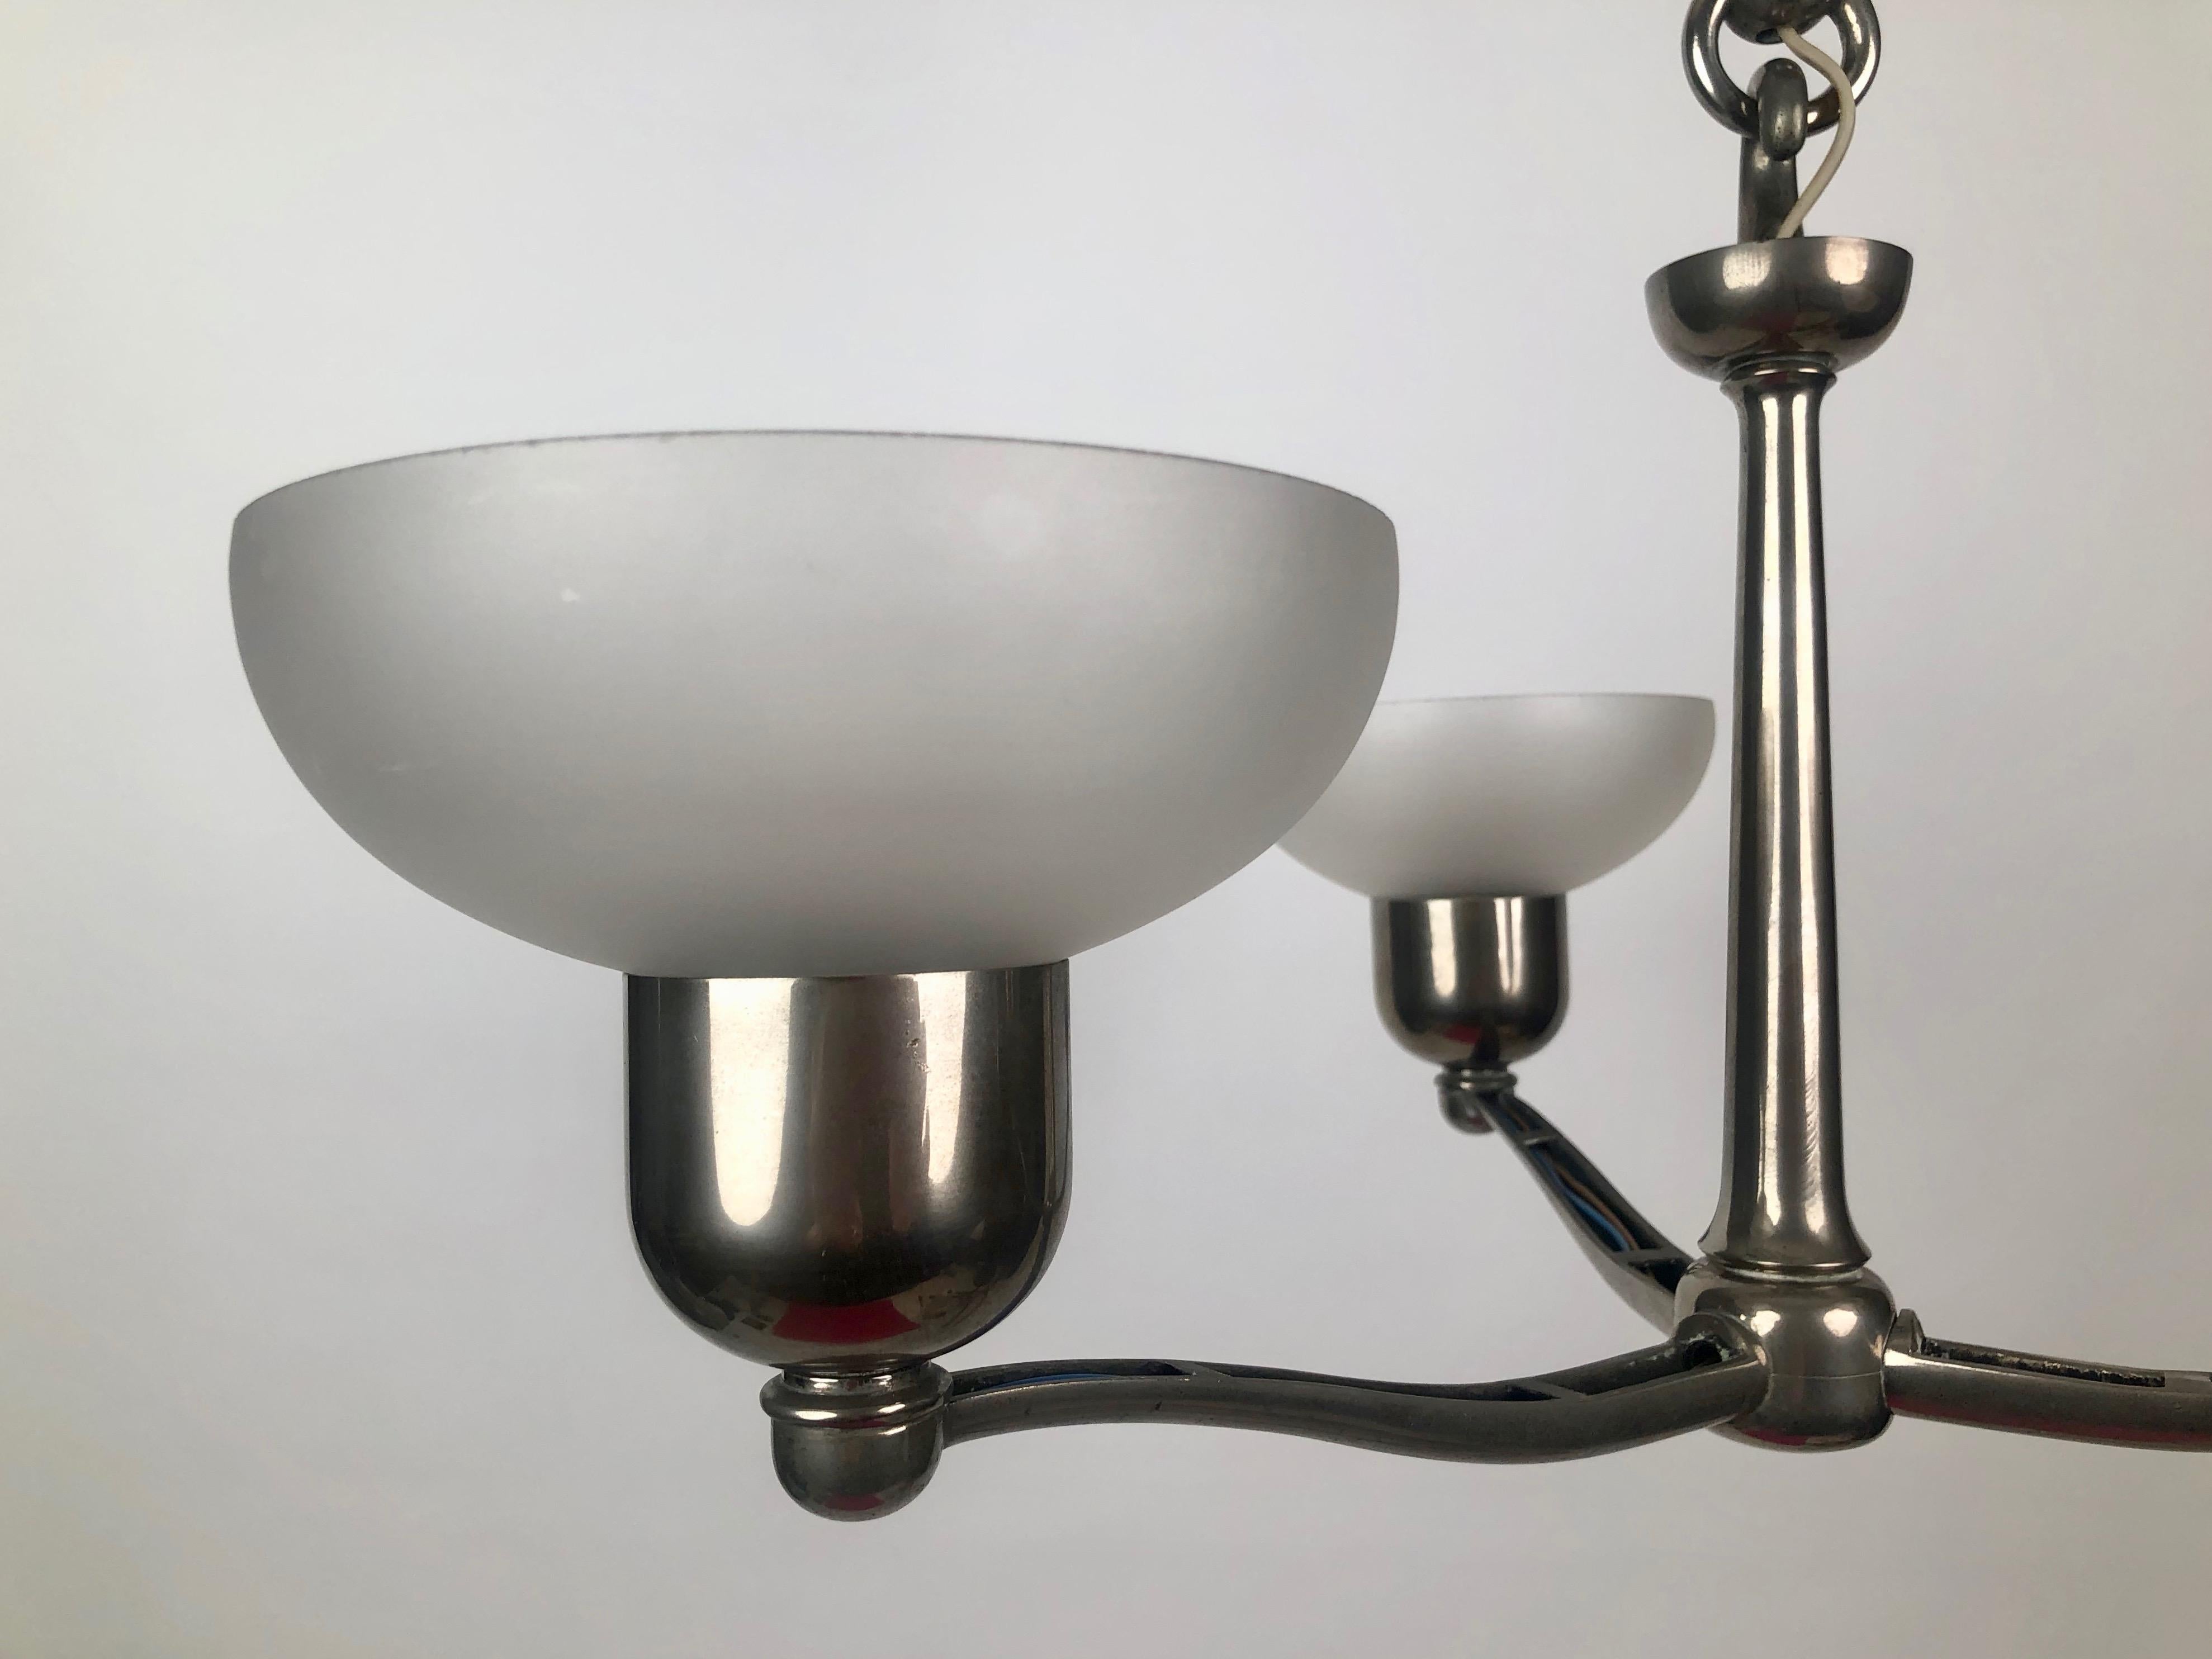 20th Century Rare Functionalist Pendant Light from the 1930's, Austria For Sale